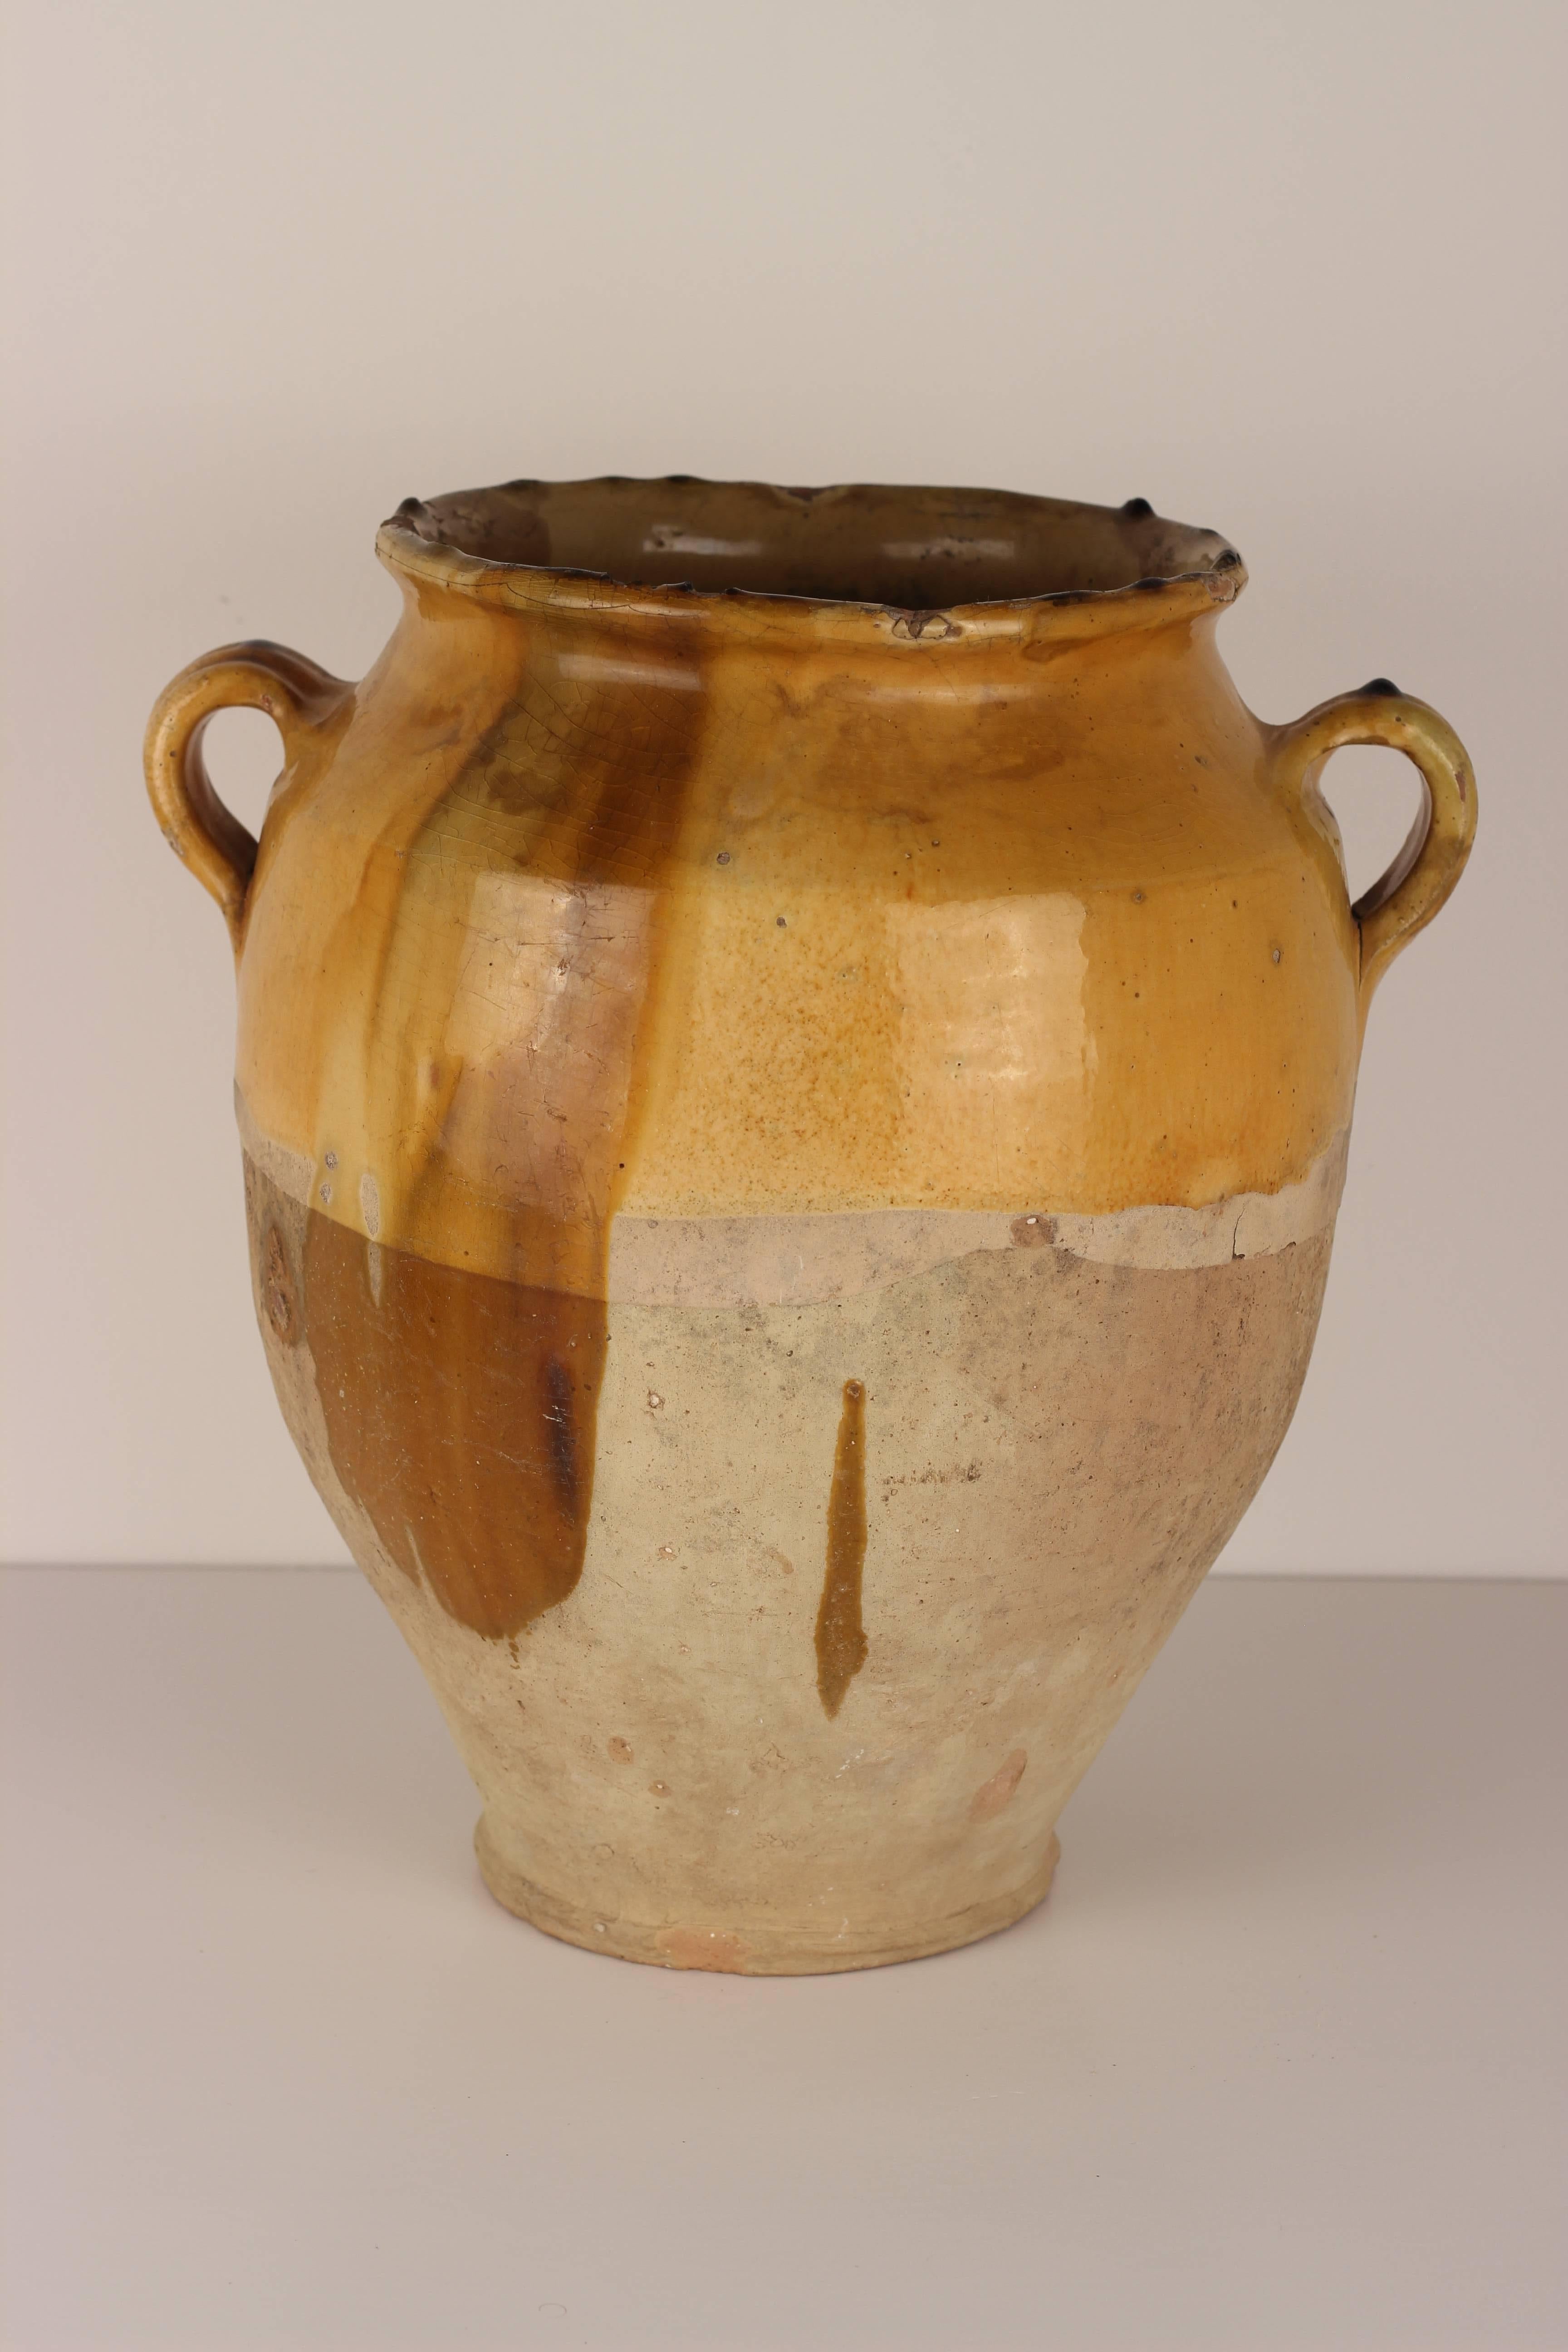 French Provincial Confit Pot from the South of France, 19th Century